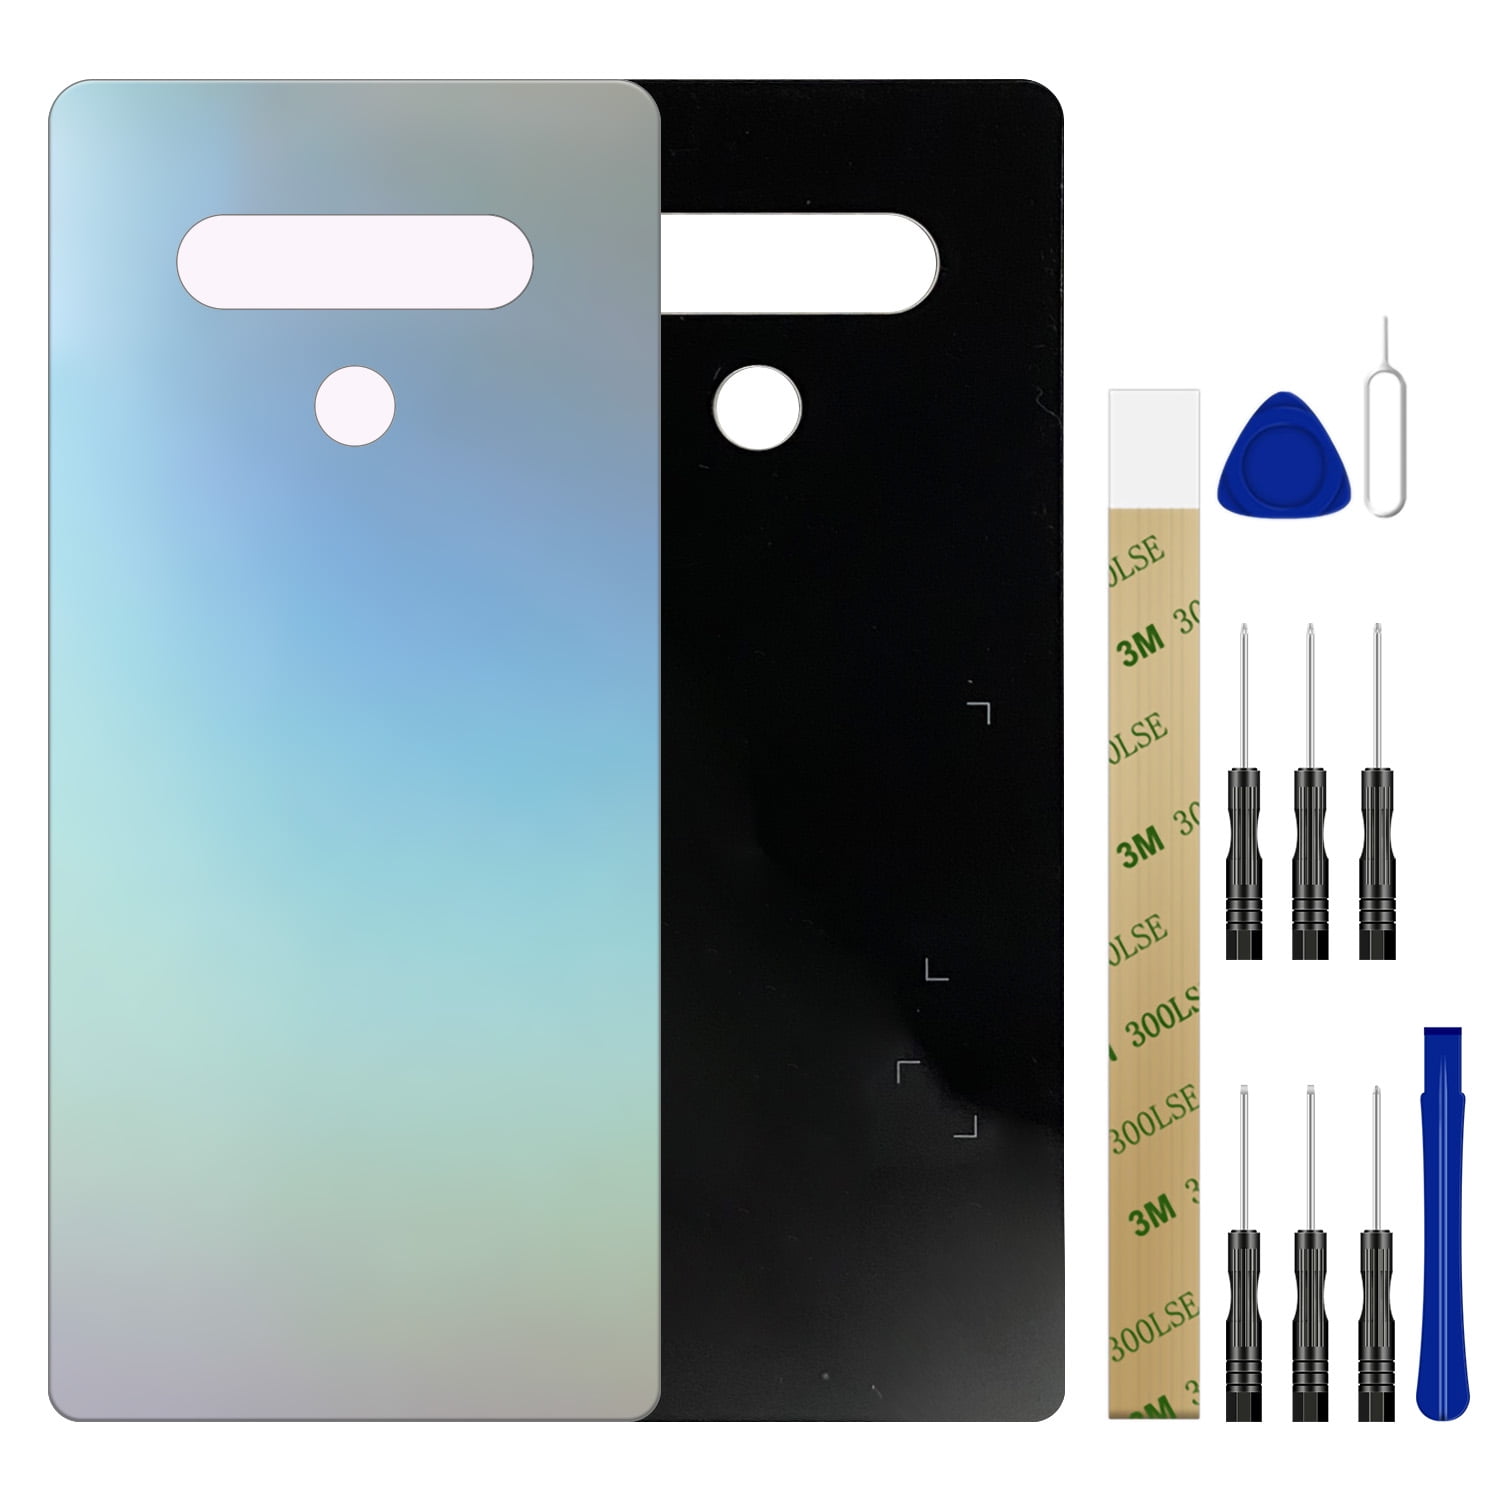 White Tools Stylo 6 Back Glass Cover Replacement Housing Door with Pre-Installed Tape for LG Stylo 6 